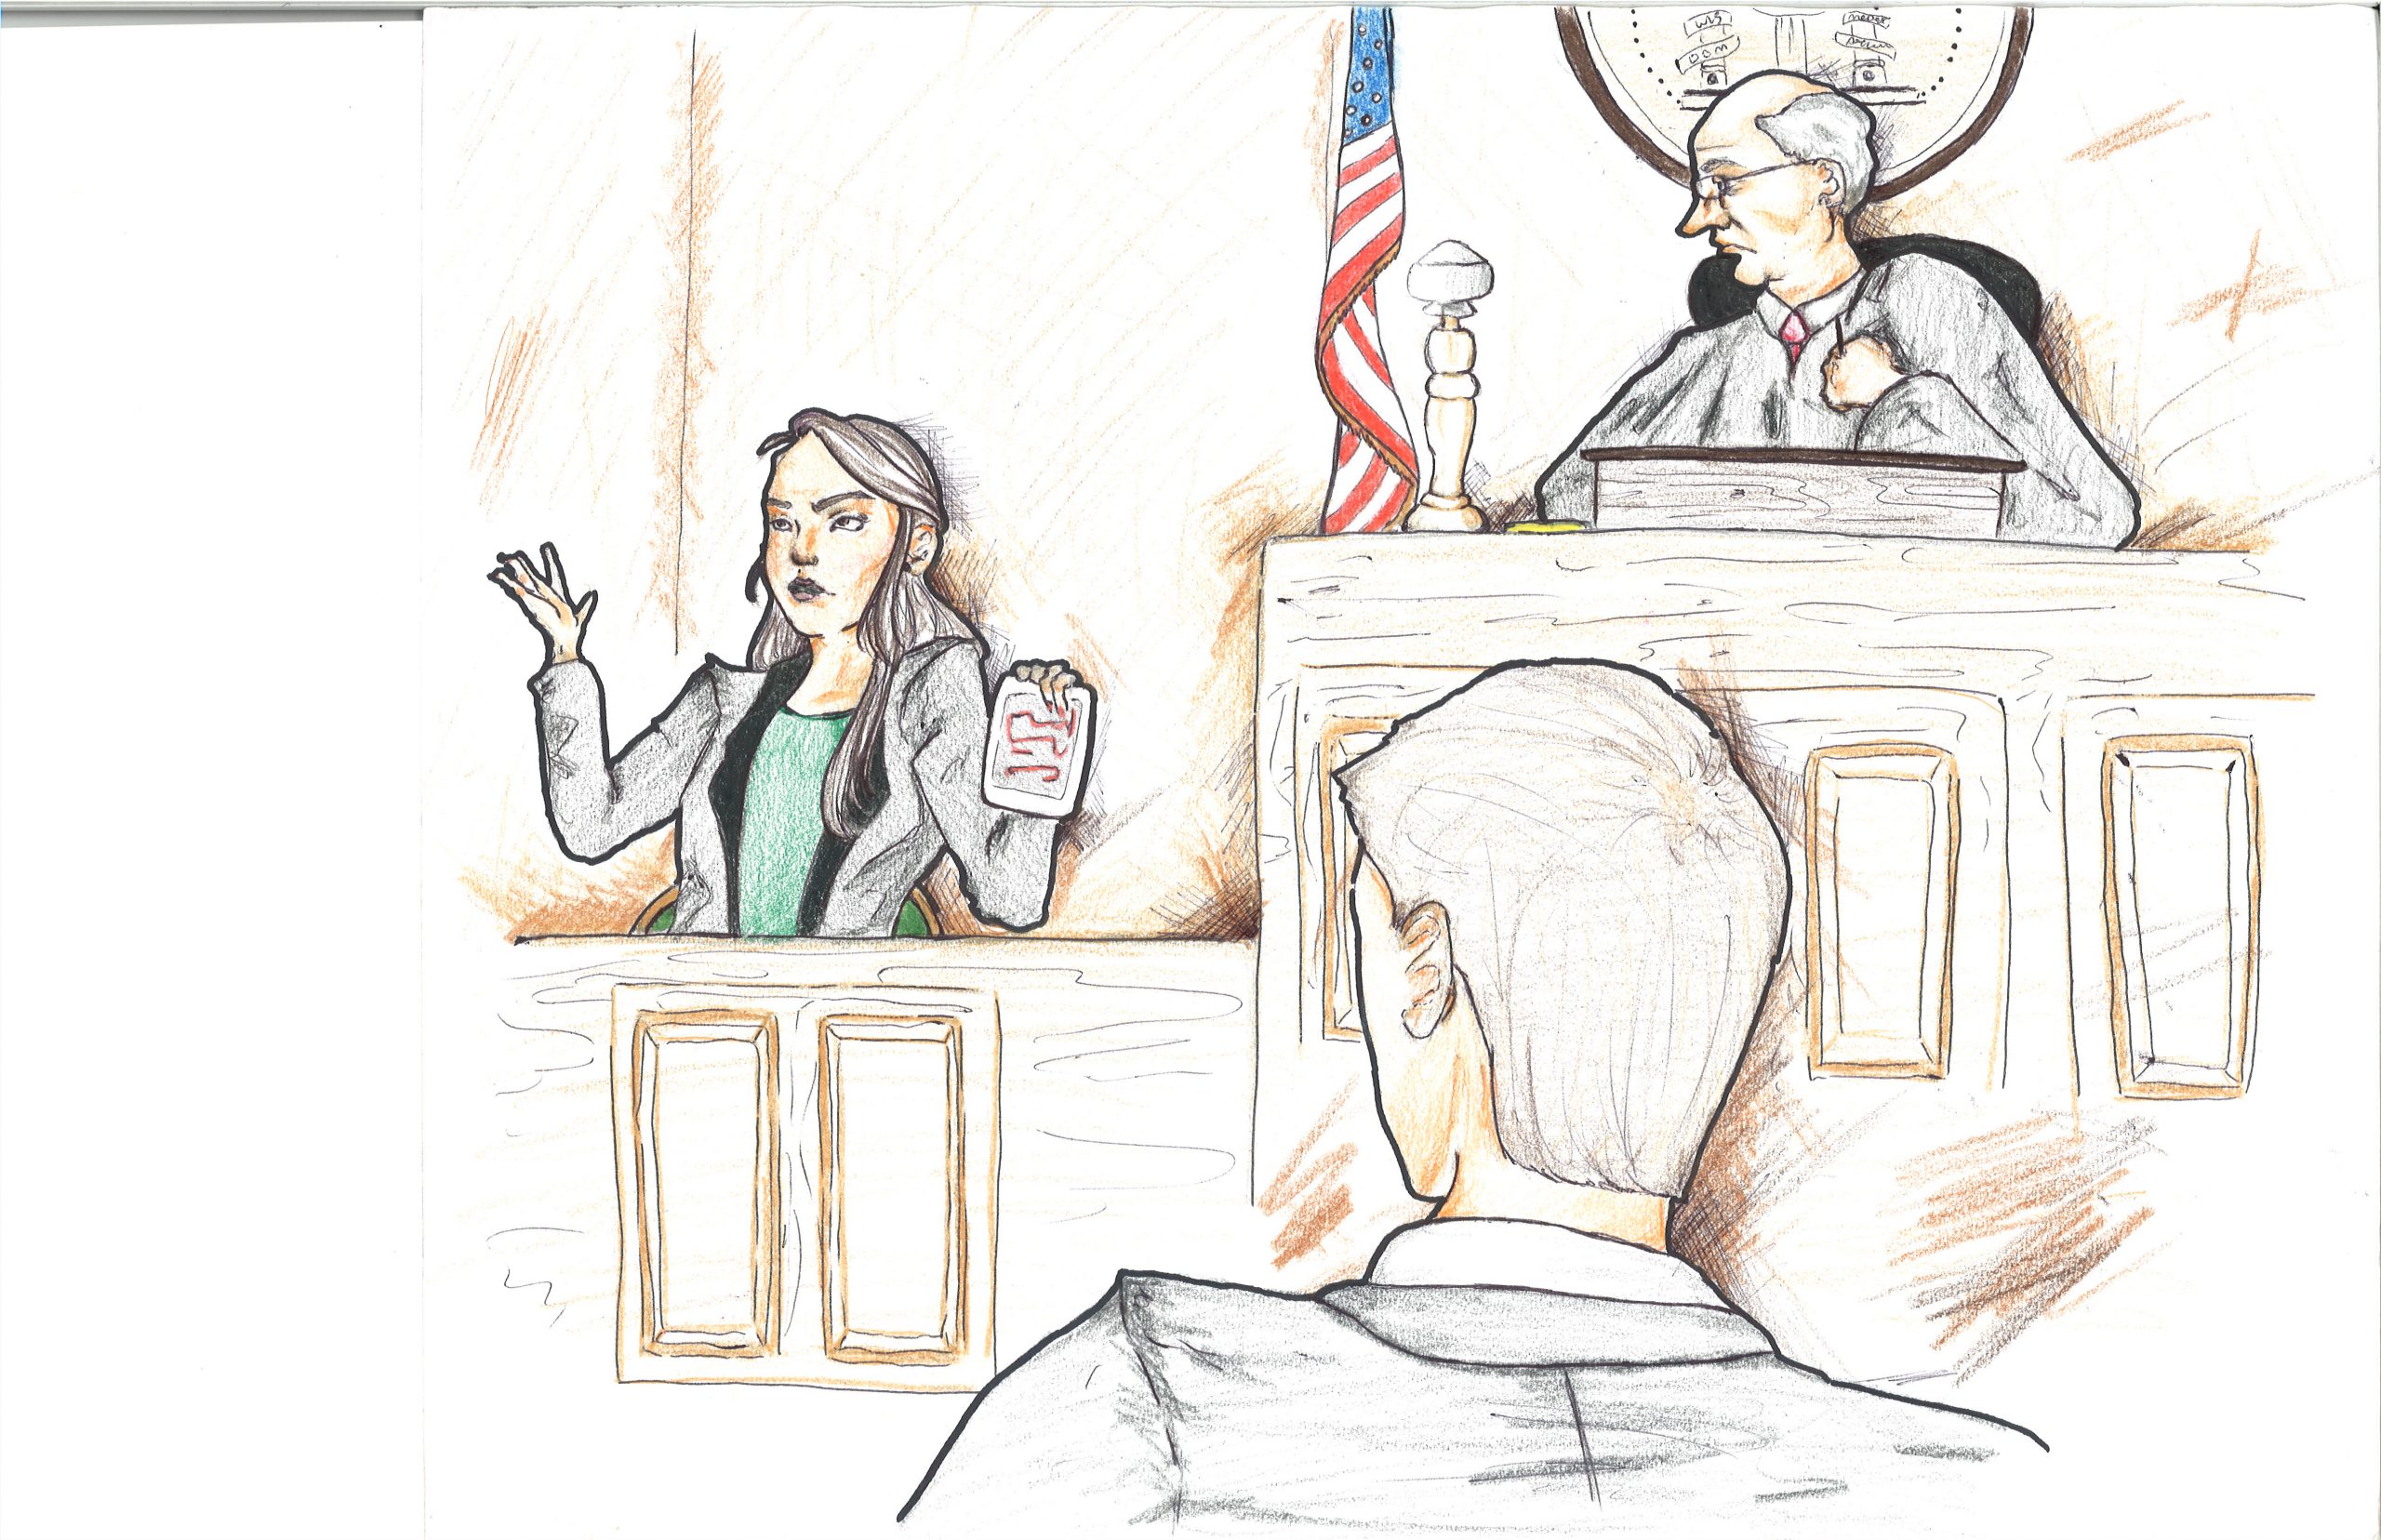 2019 Third Place National Courtroom Artist Contest